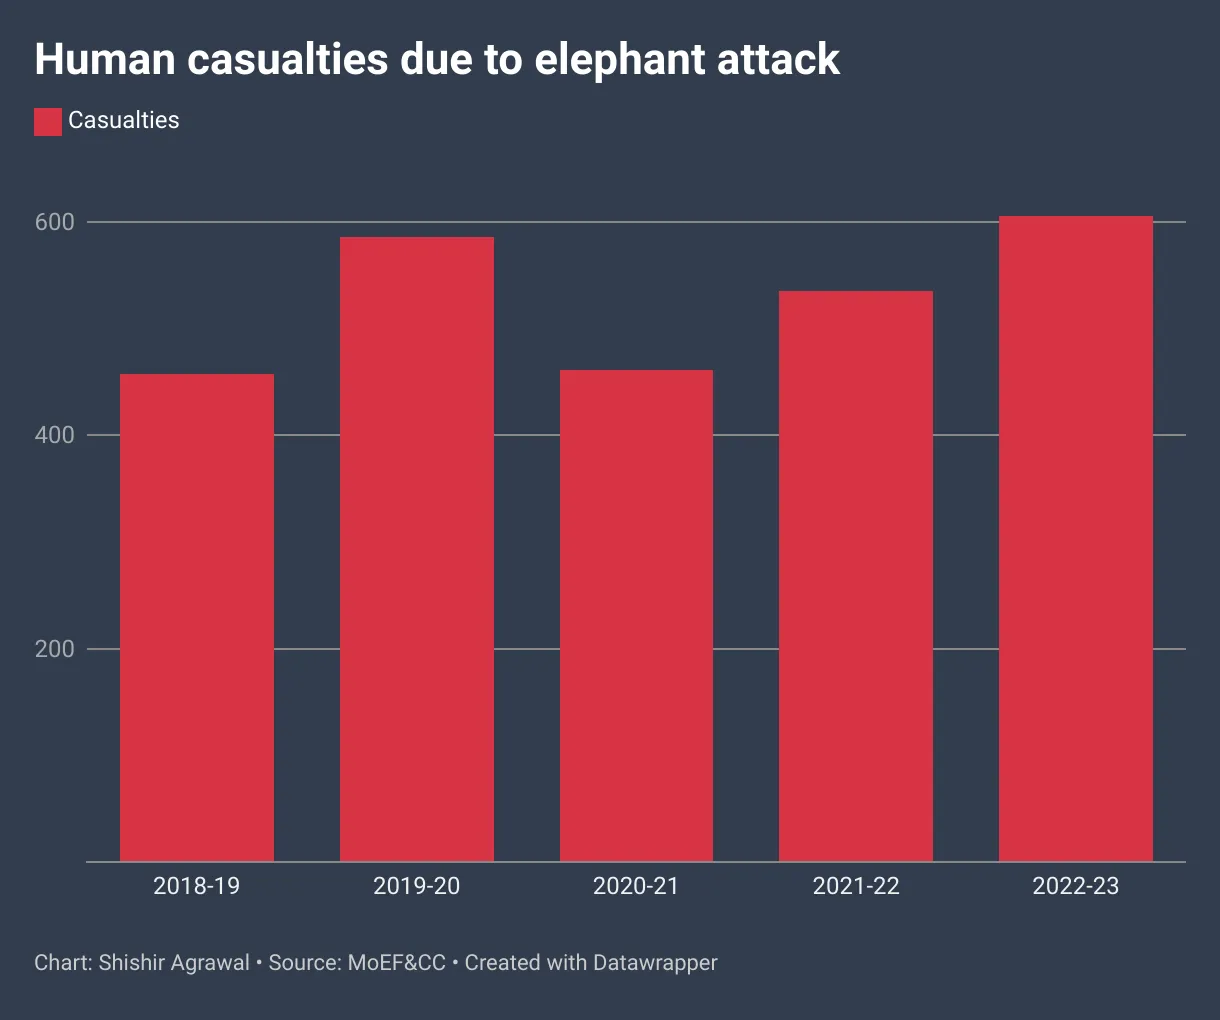 Human Casualties due to elephant attack